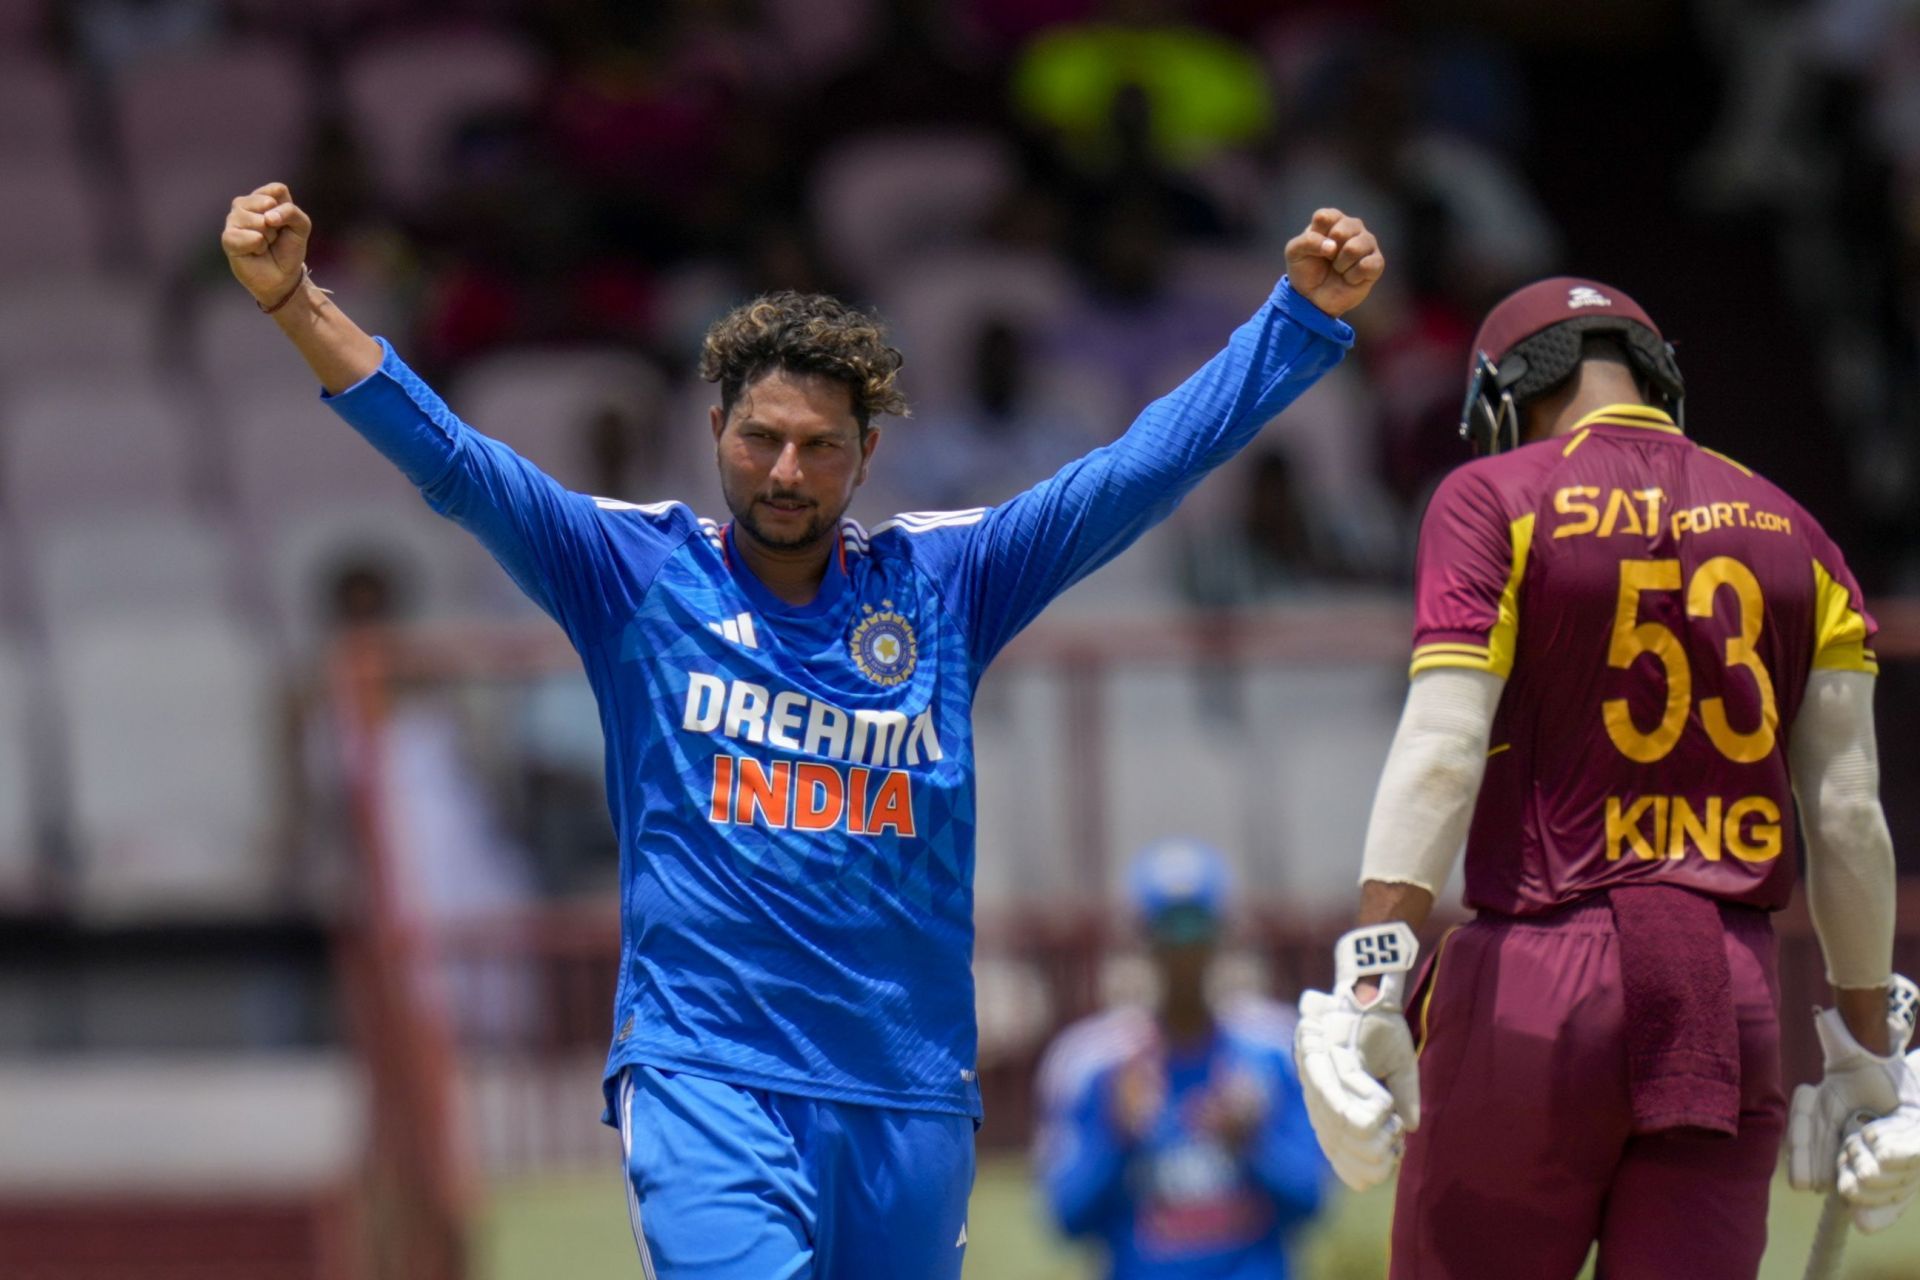 Kuldeep Yadav could relish bowling to Nepal&#039;s batters, who wouldn&#039;t have faced him before